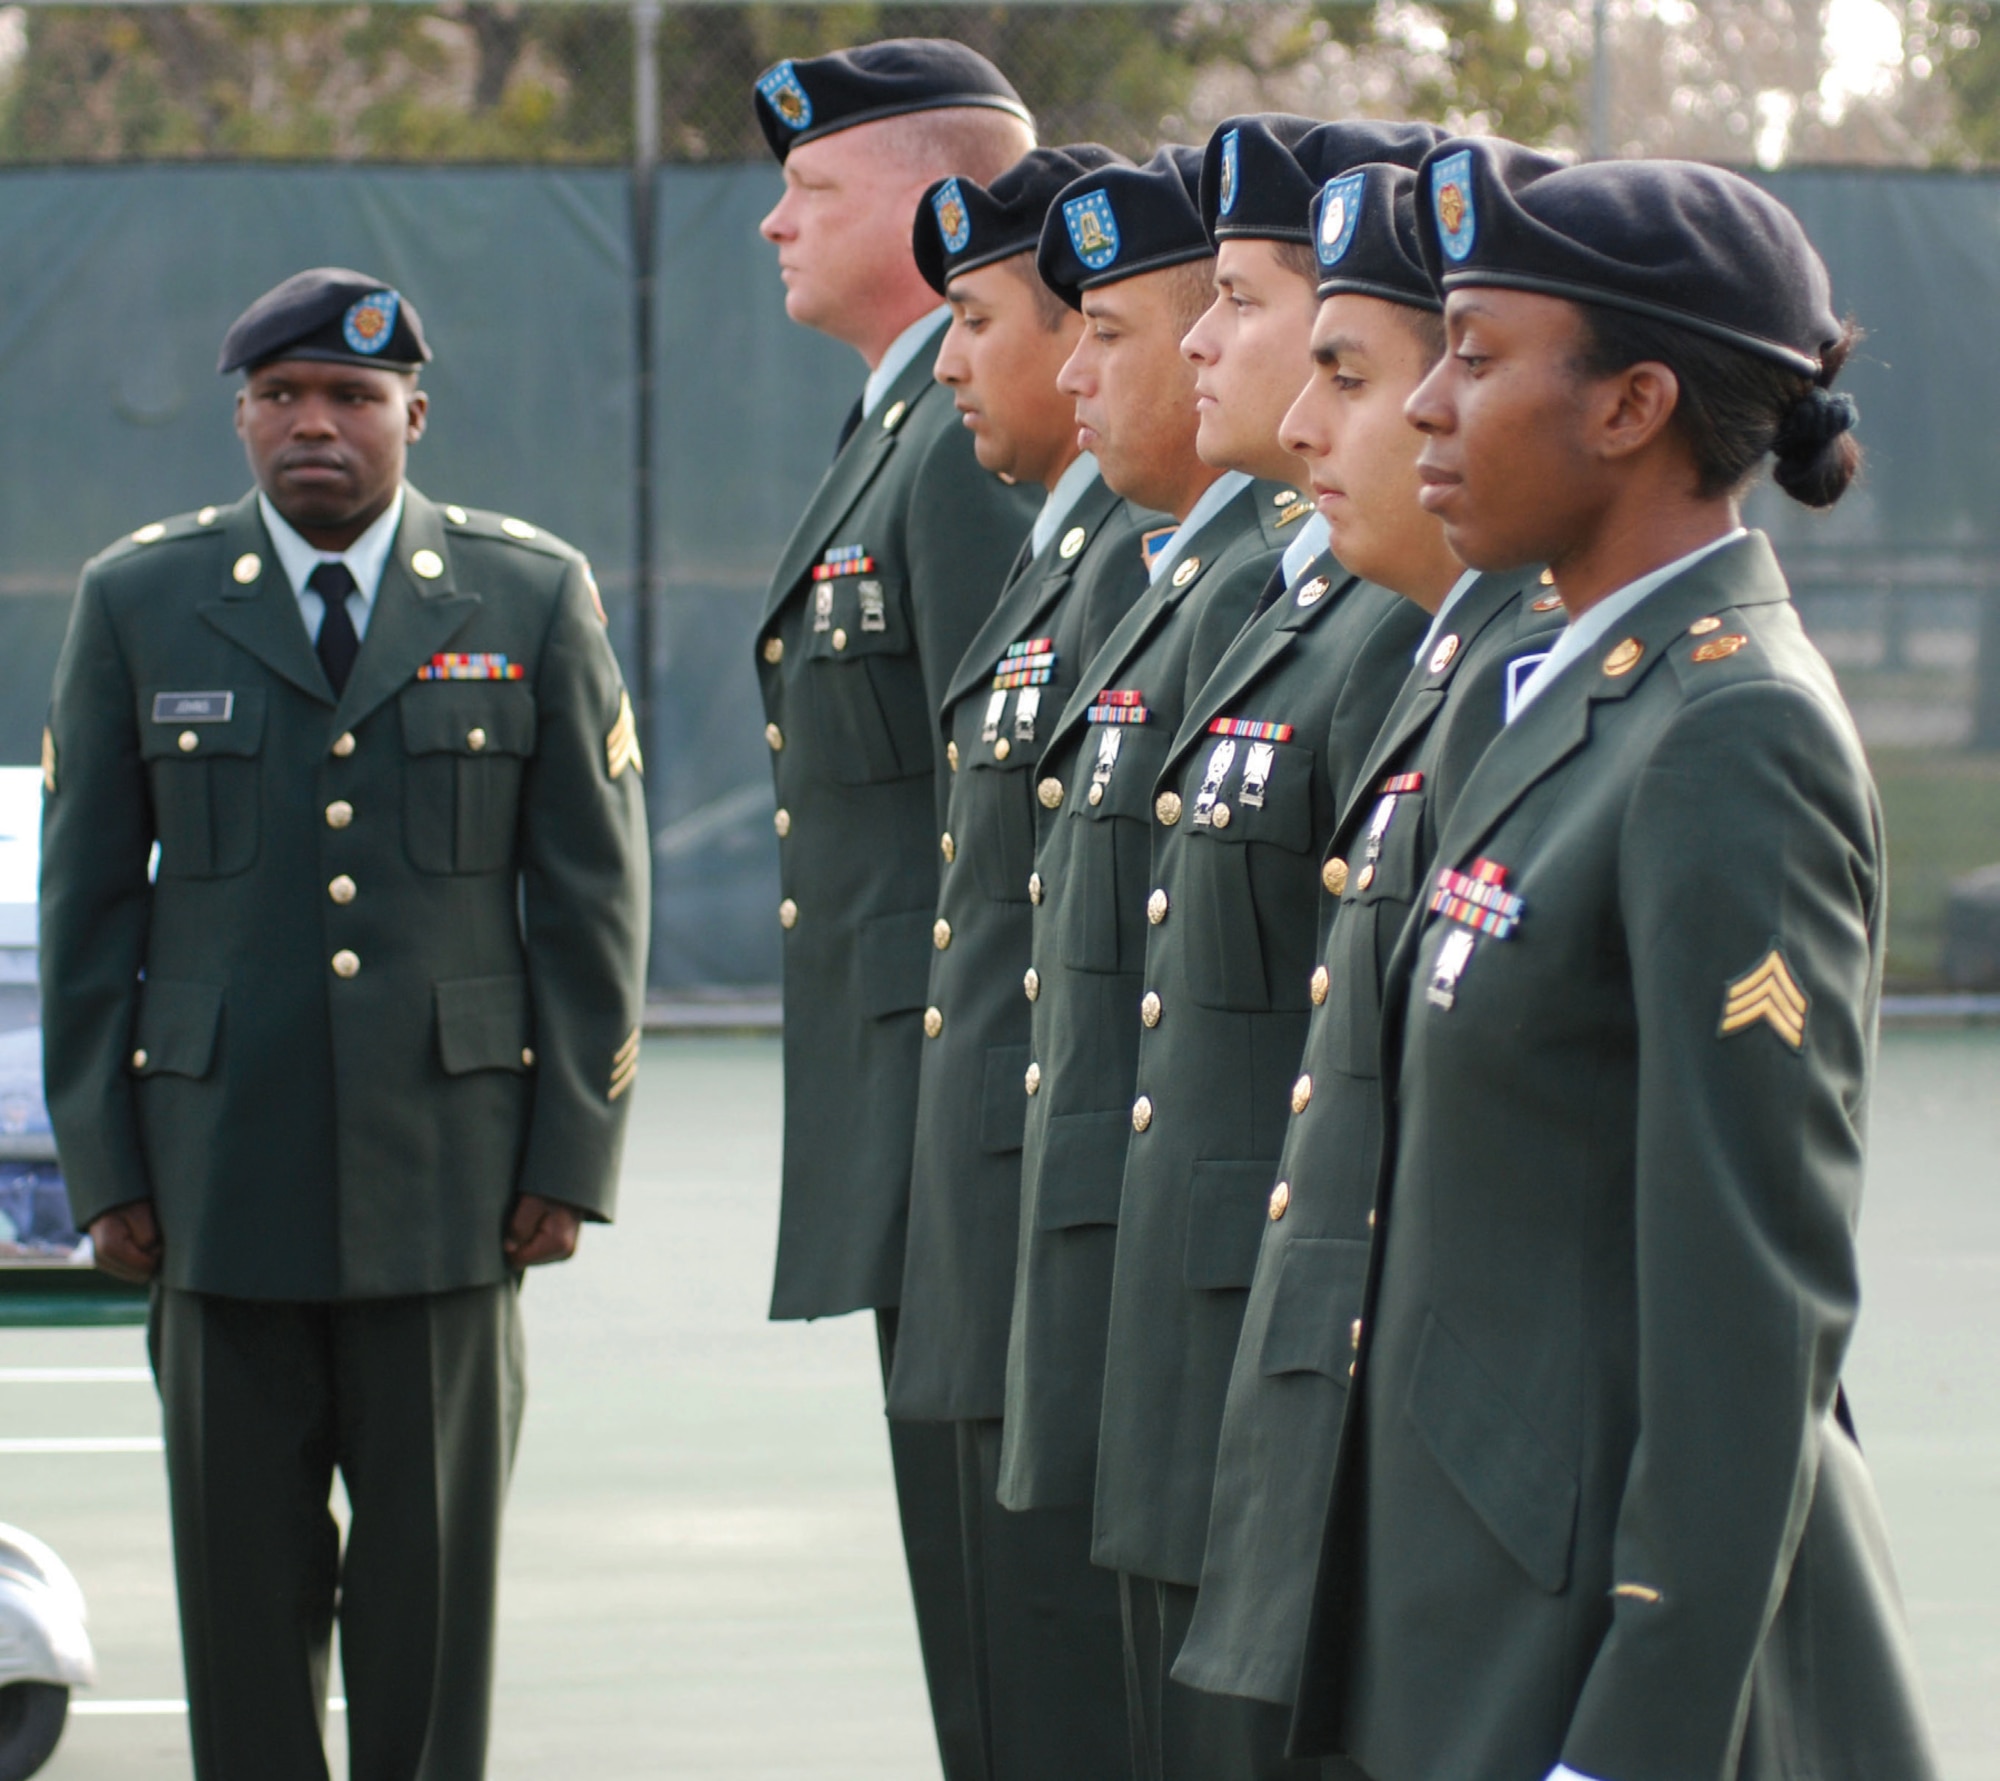 Army Reserve Honor Guard practice on base. (U.S. Air Force photo by Staff Sgt. Megan Crusher)